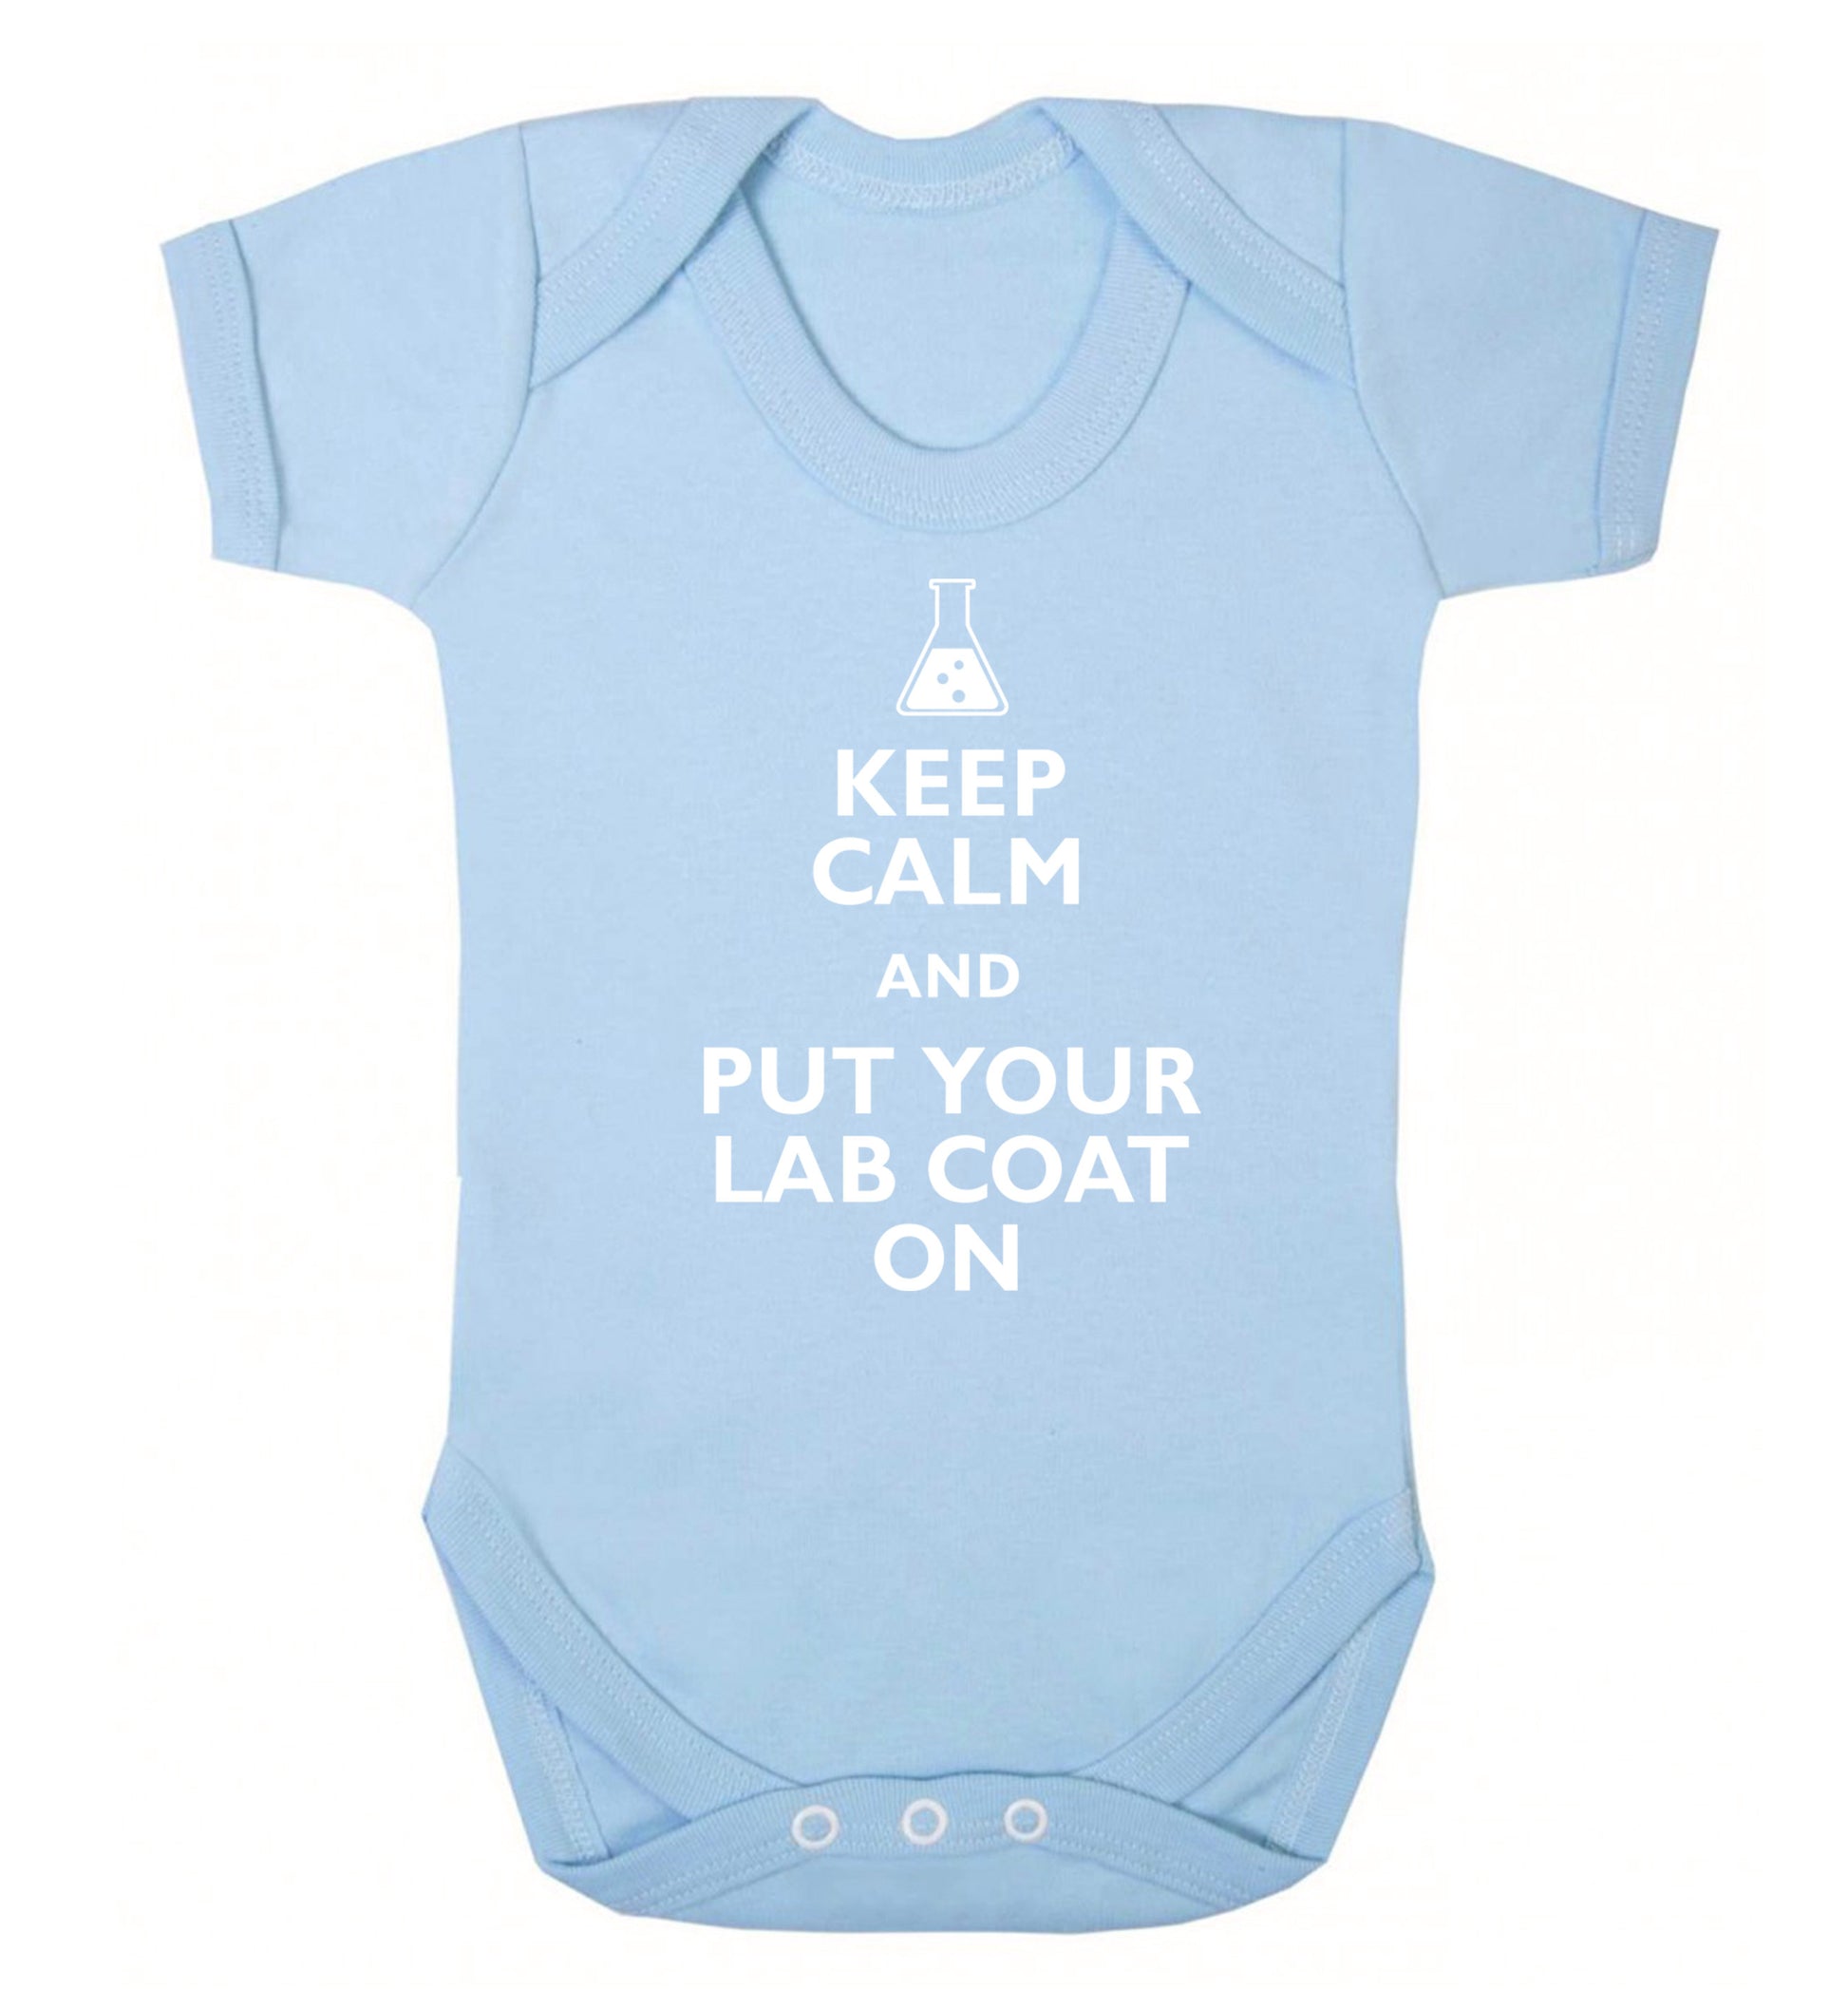 Keep calm and put your lab coat on Baby Vest pale blue 18-24 months